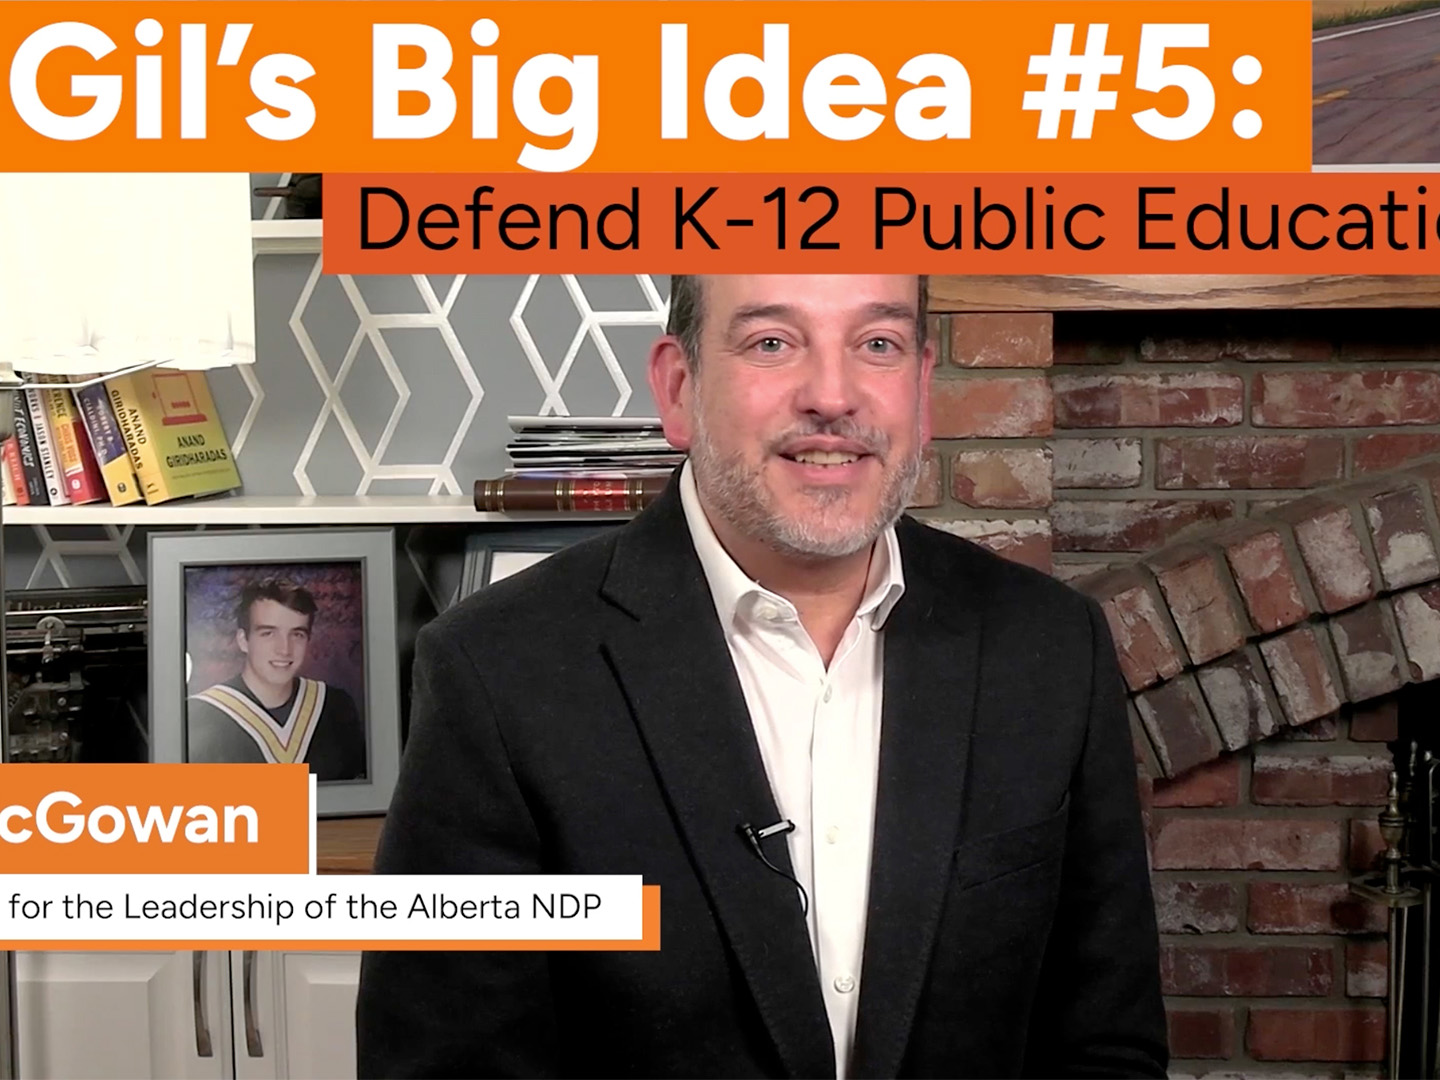 UCP’s ideological attack on public education has partisan purposes, McGowan charges